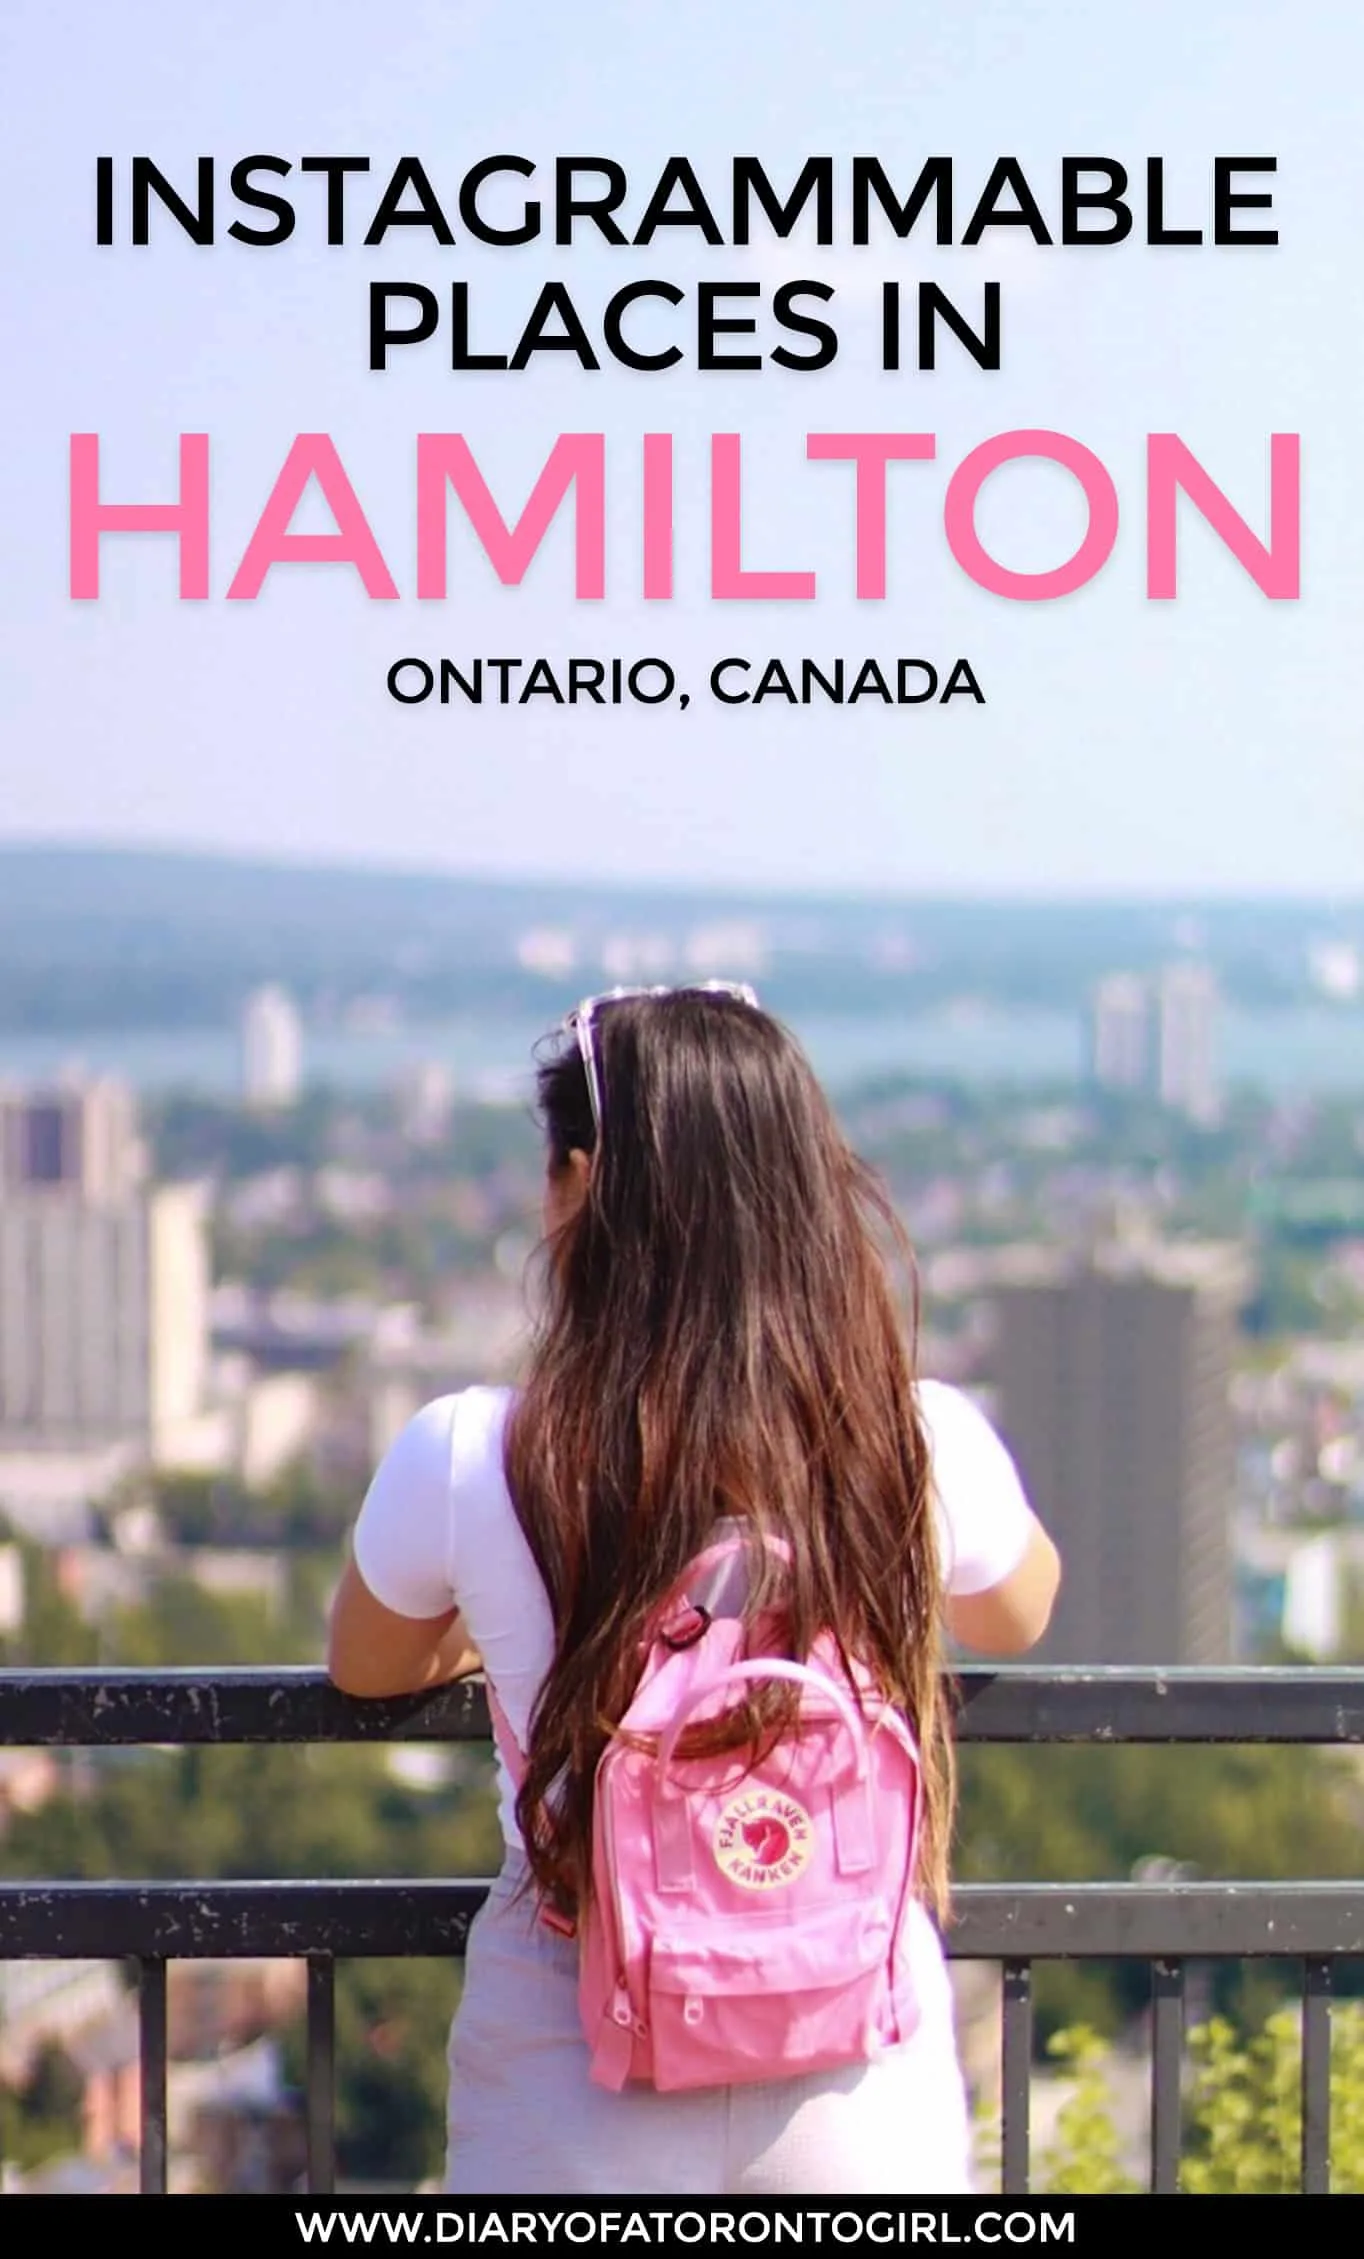 Planning a visit to the waterfall capital of the world here in Canada? Here's your ultimate guide to the prettiest and most Instagrammable spots to visit during your trip to Hamilton, Ontario!